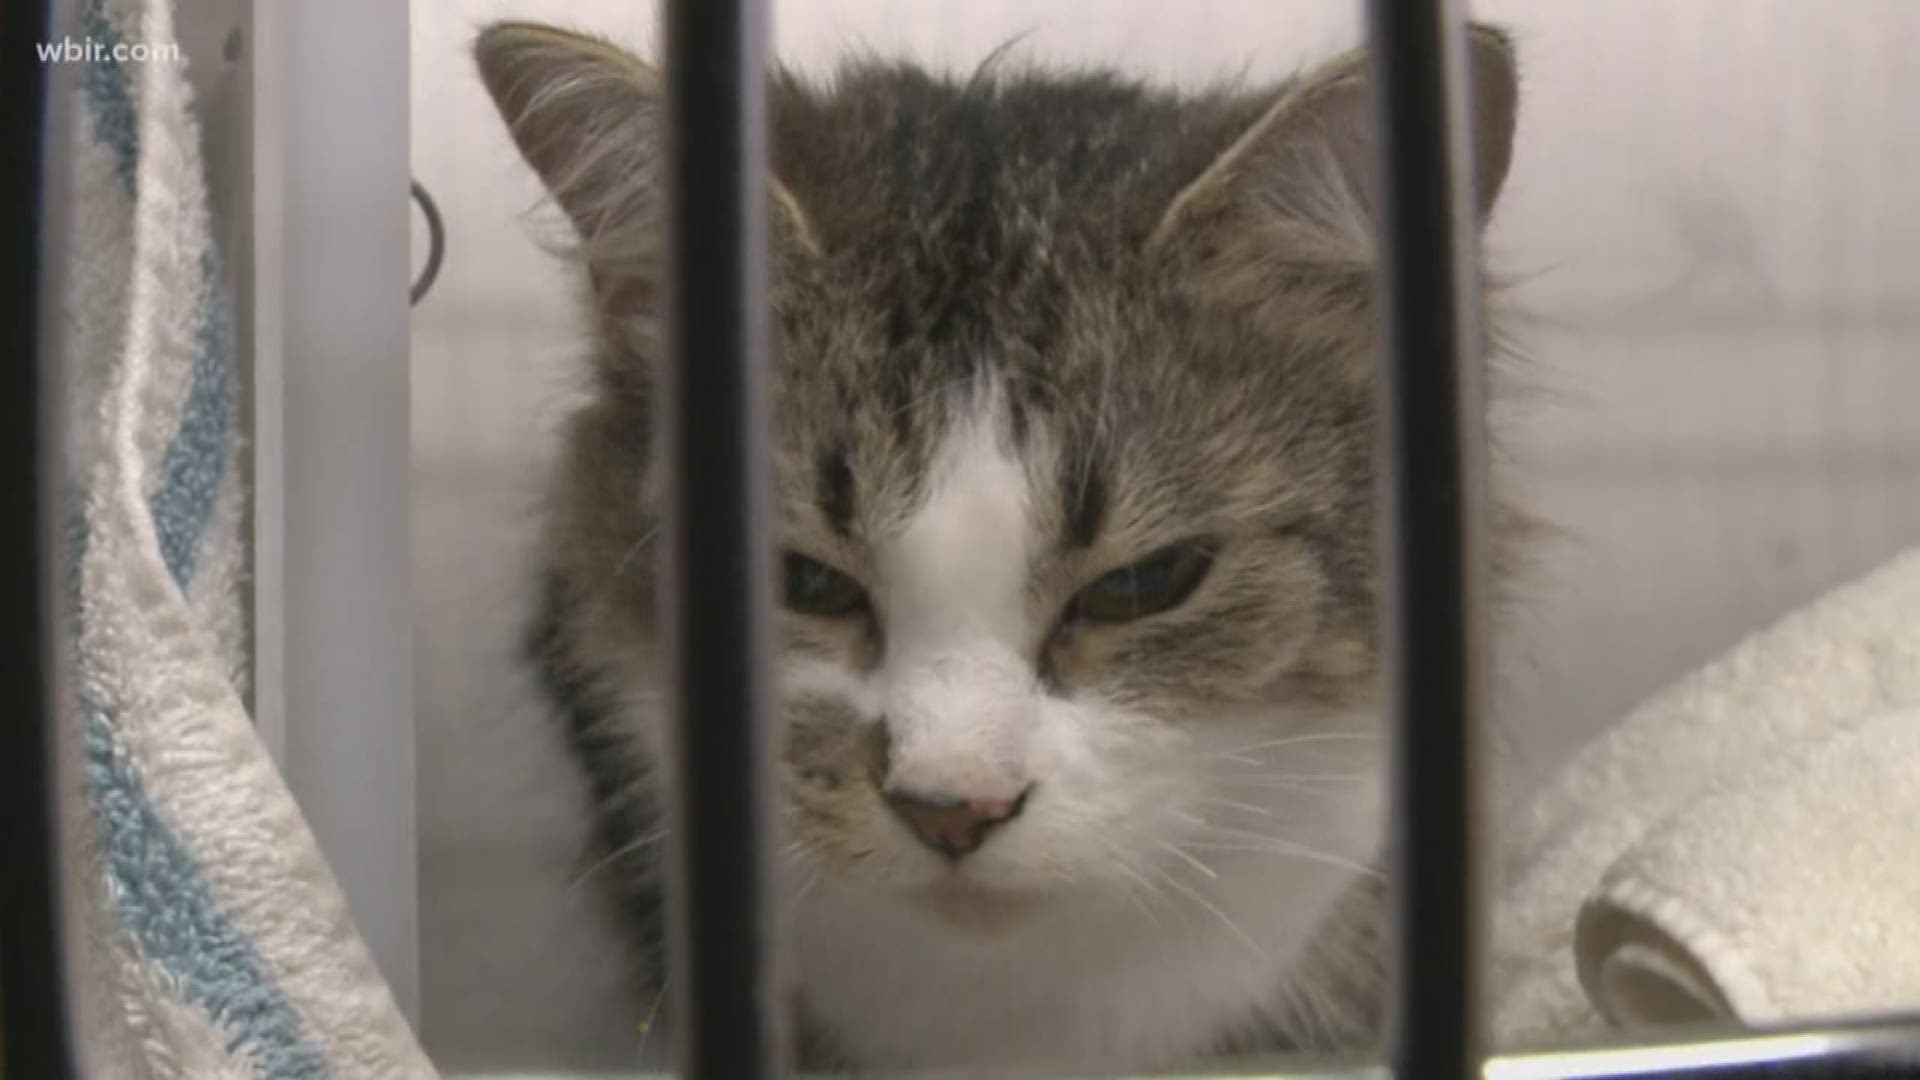 The animal center says the rescuer was working to find the cats homes -- but decided to surrender all 40 of them to Young Williams so they can find homes sooner.